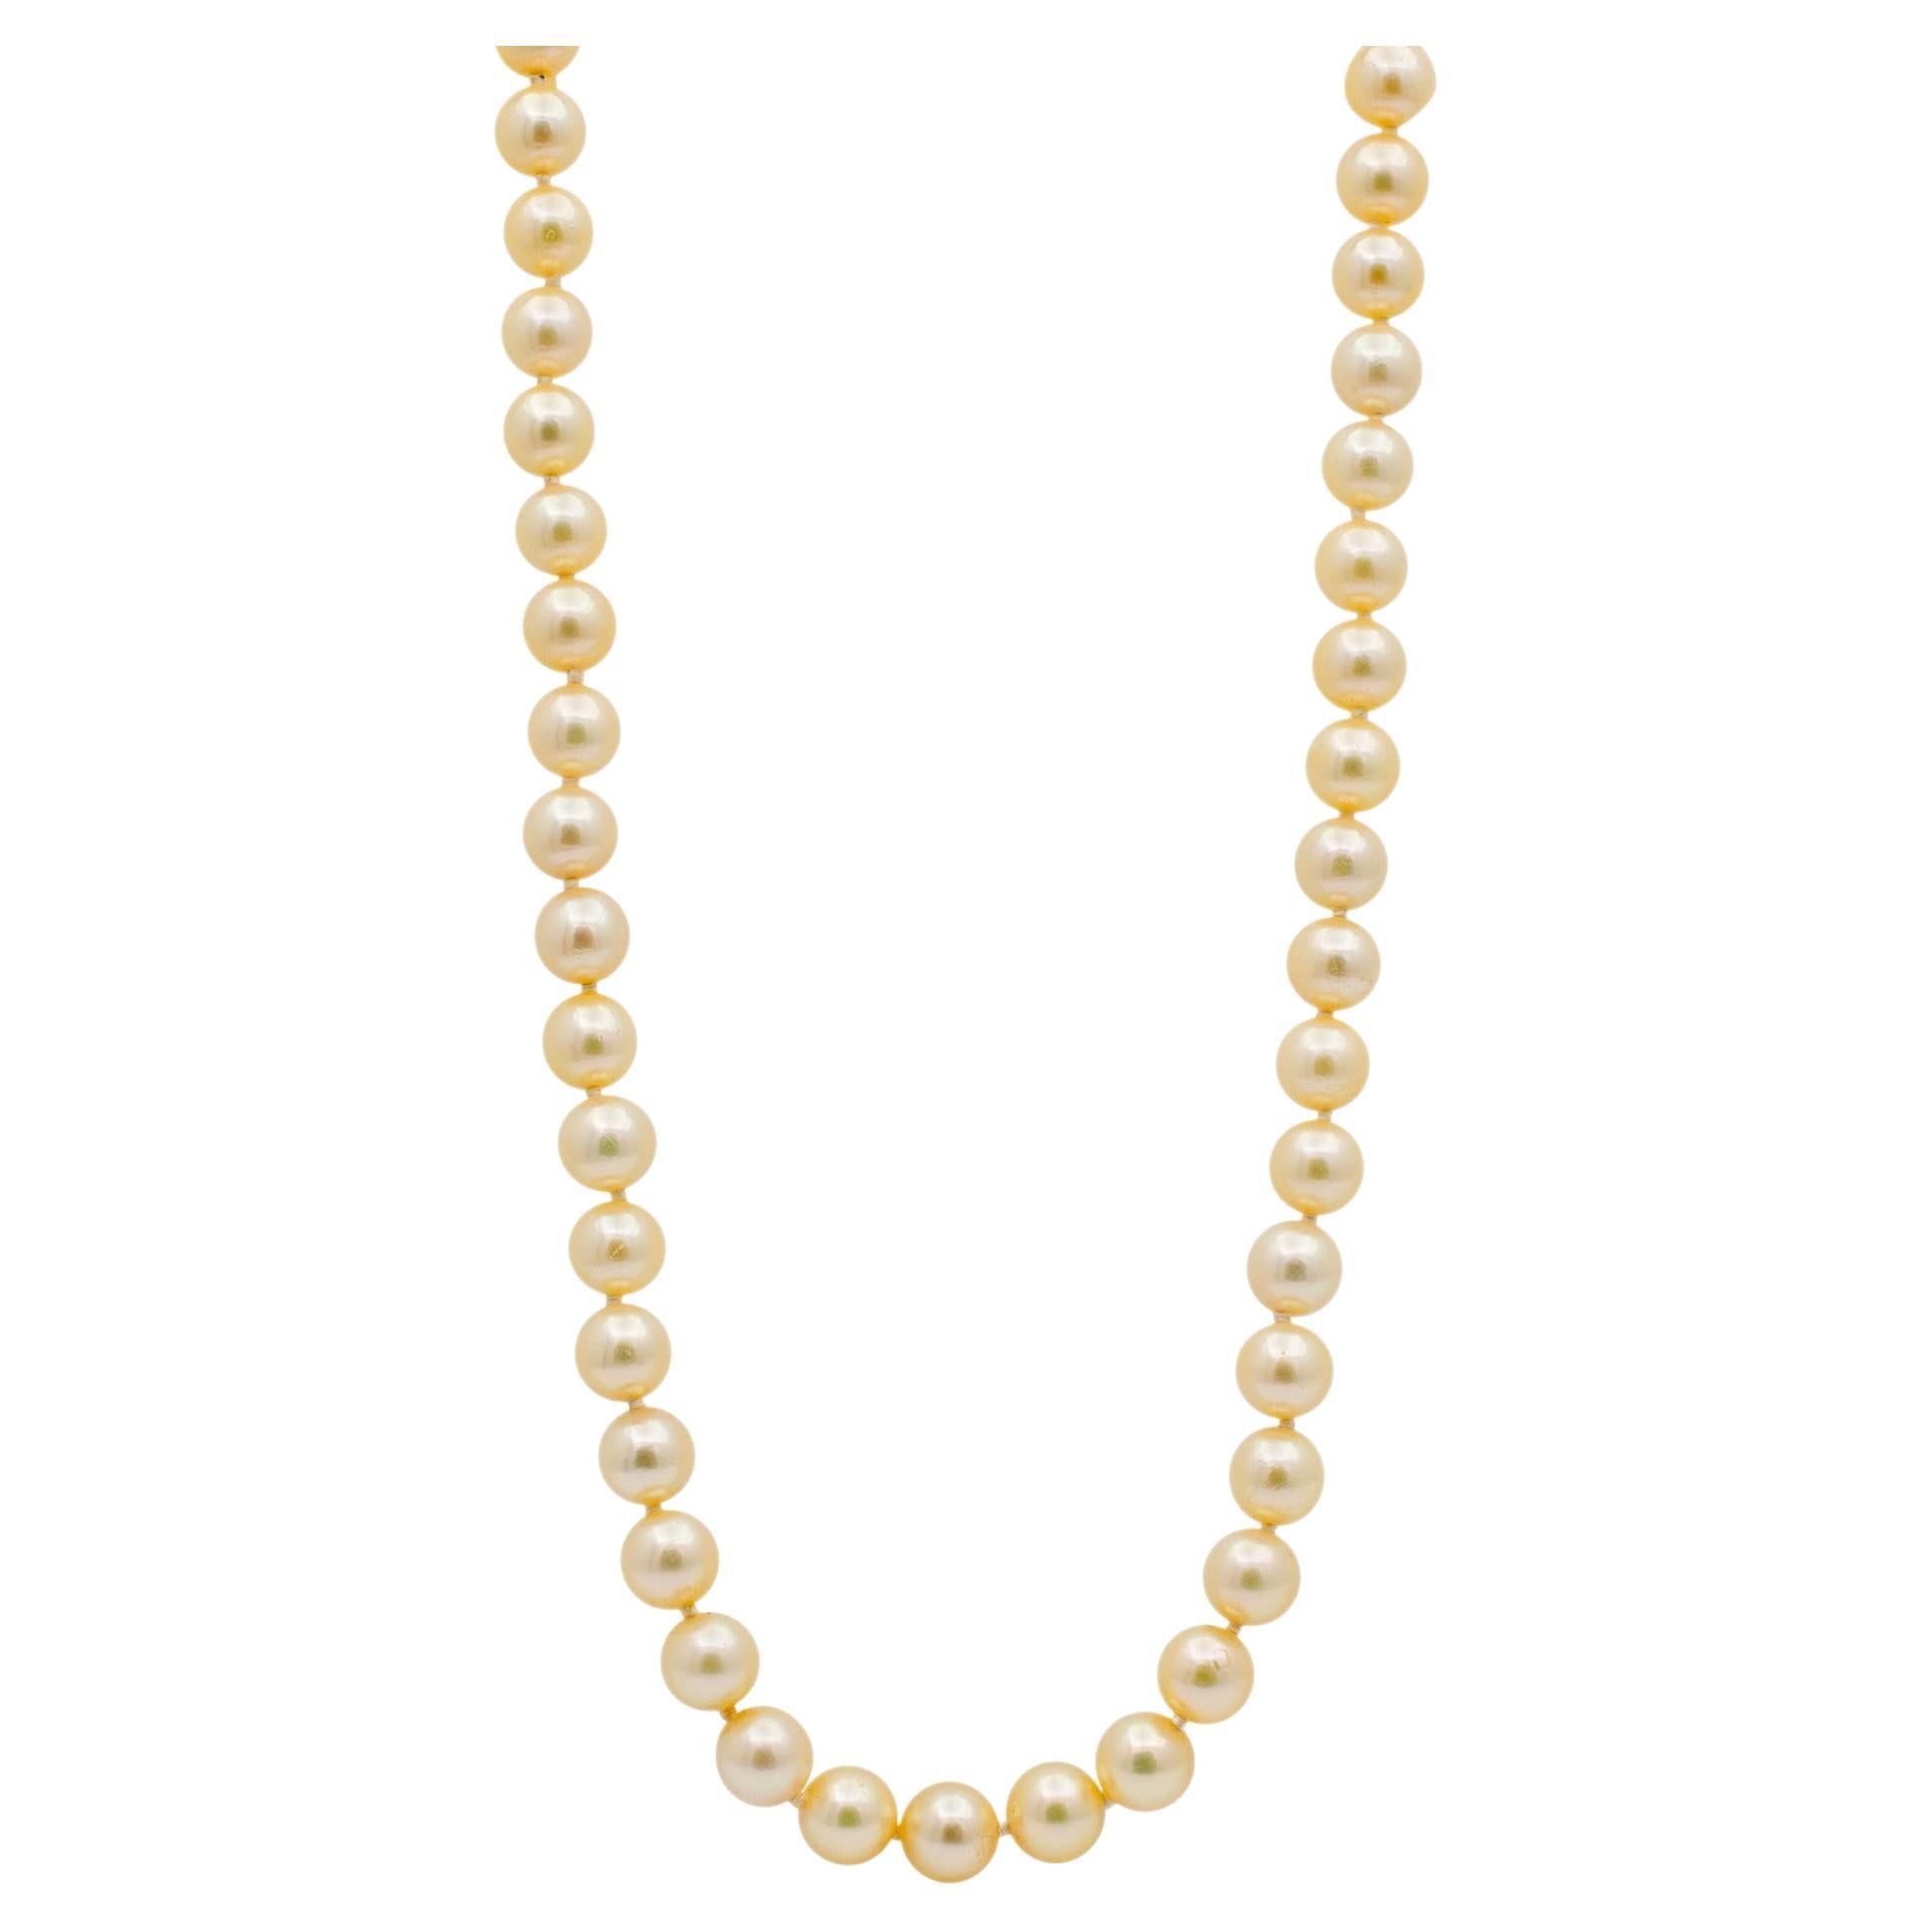 Ladies Vintage Natural Pearl Beads Cocktail Chain Necklace With 14K Yellow Gold